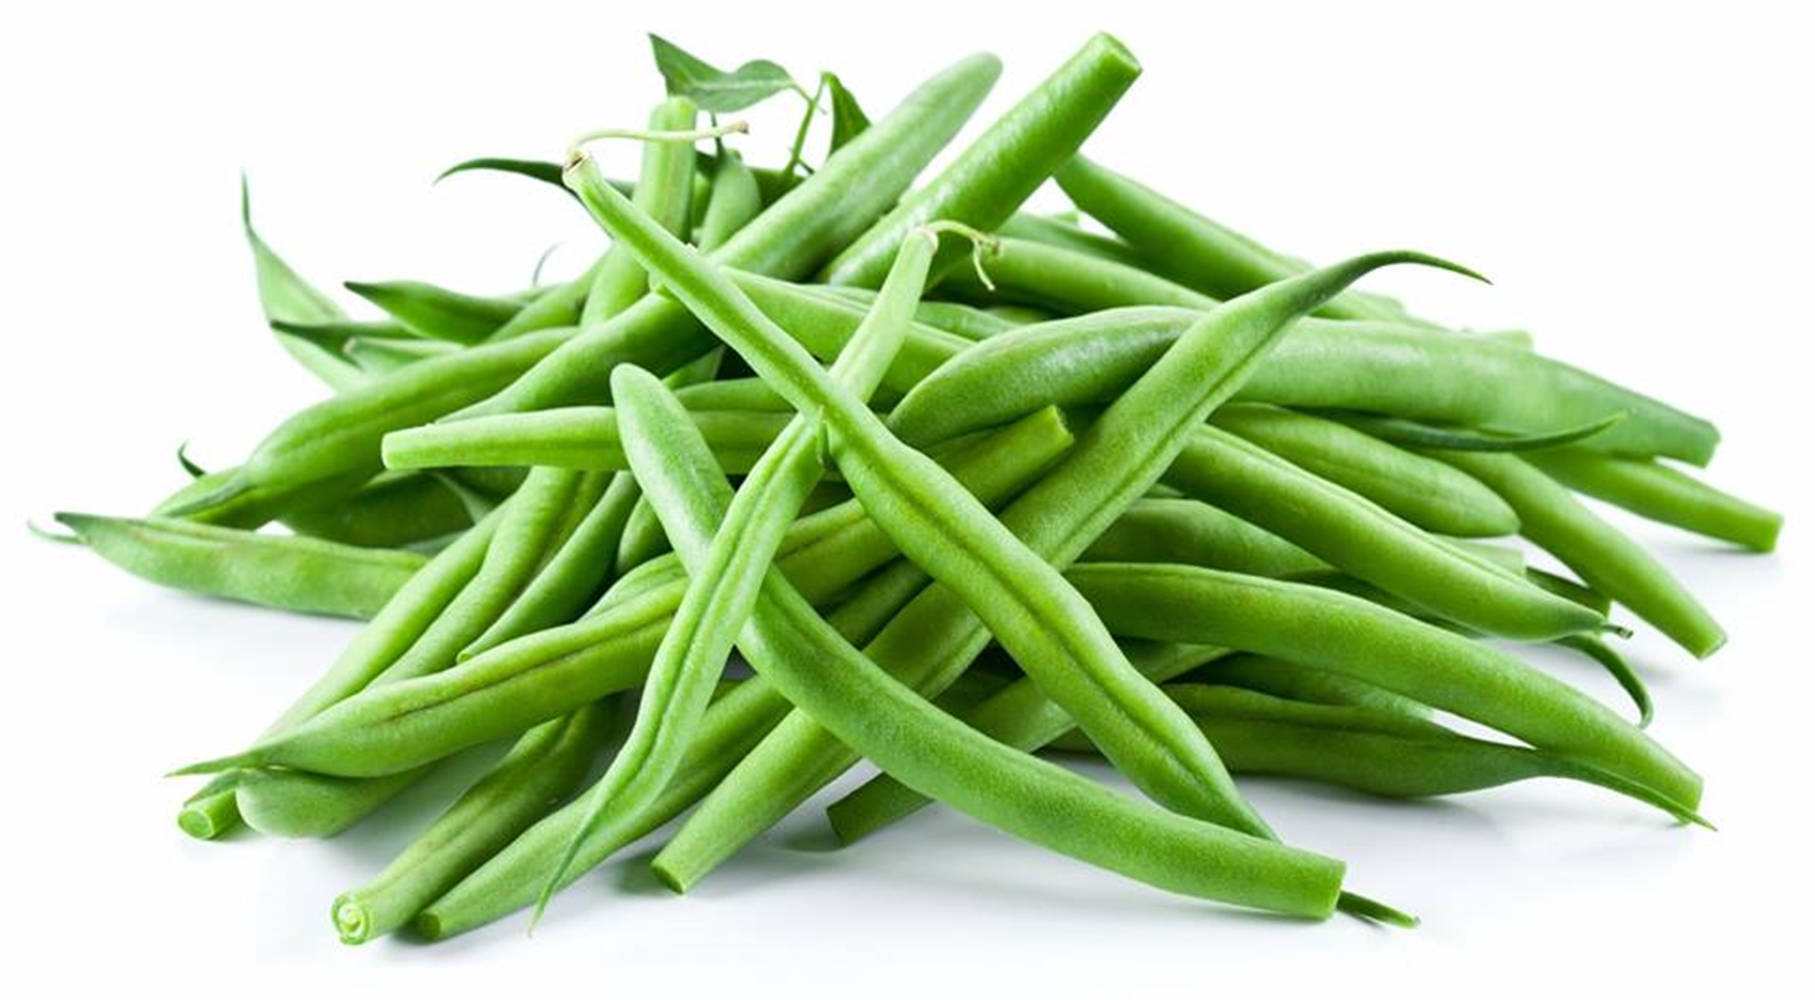 Local Green Beans Background